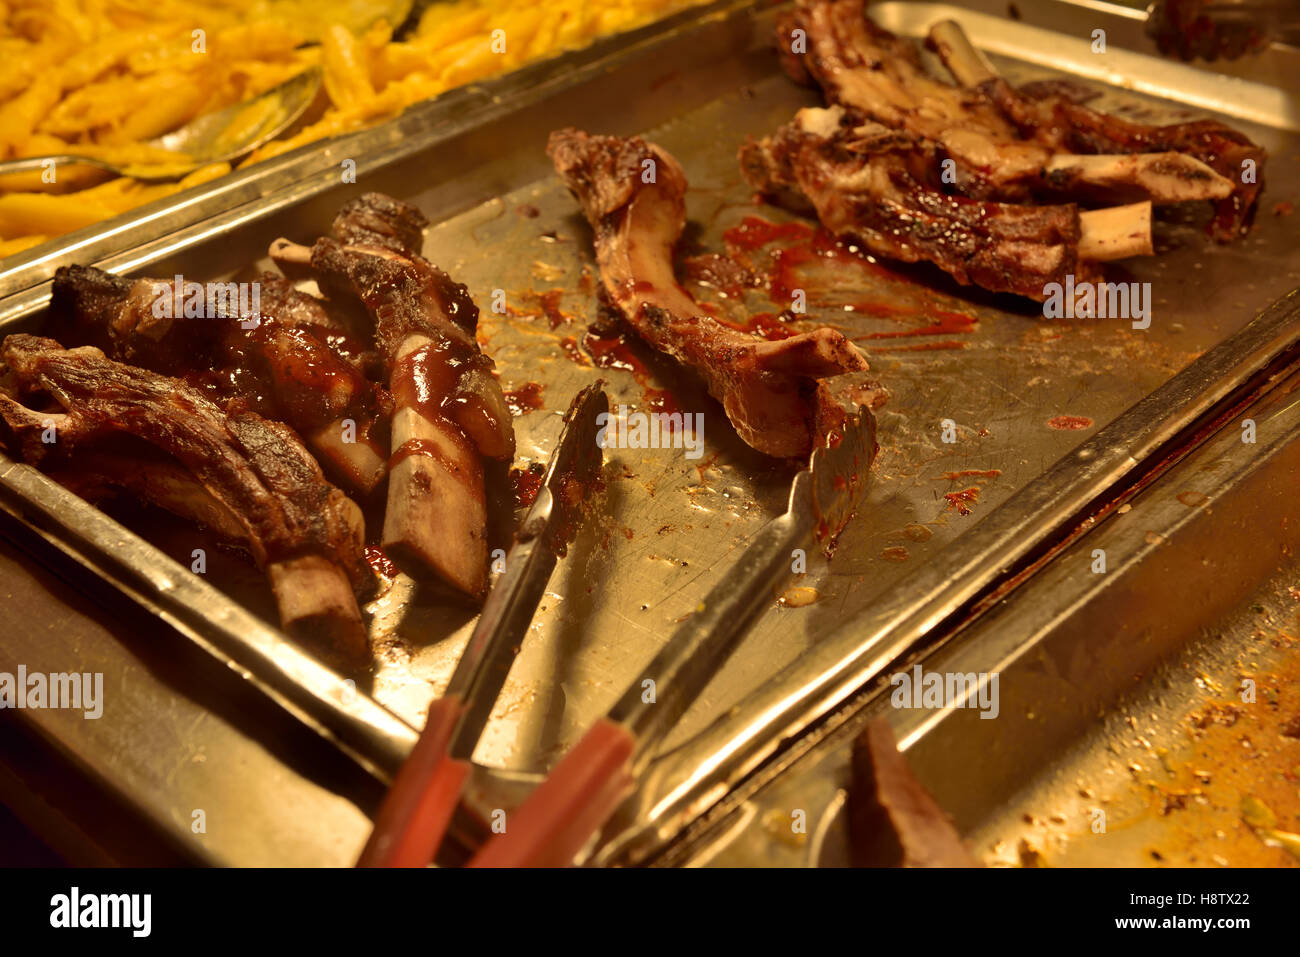 Ribs buffet selection in “all you can eat” restaurant Stock Photo